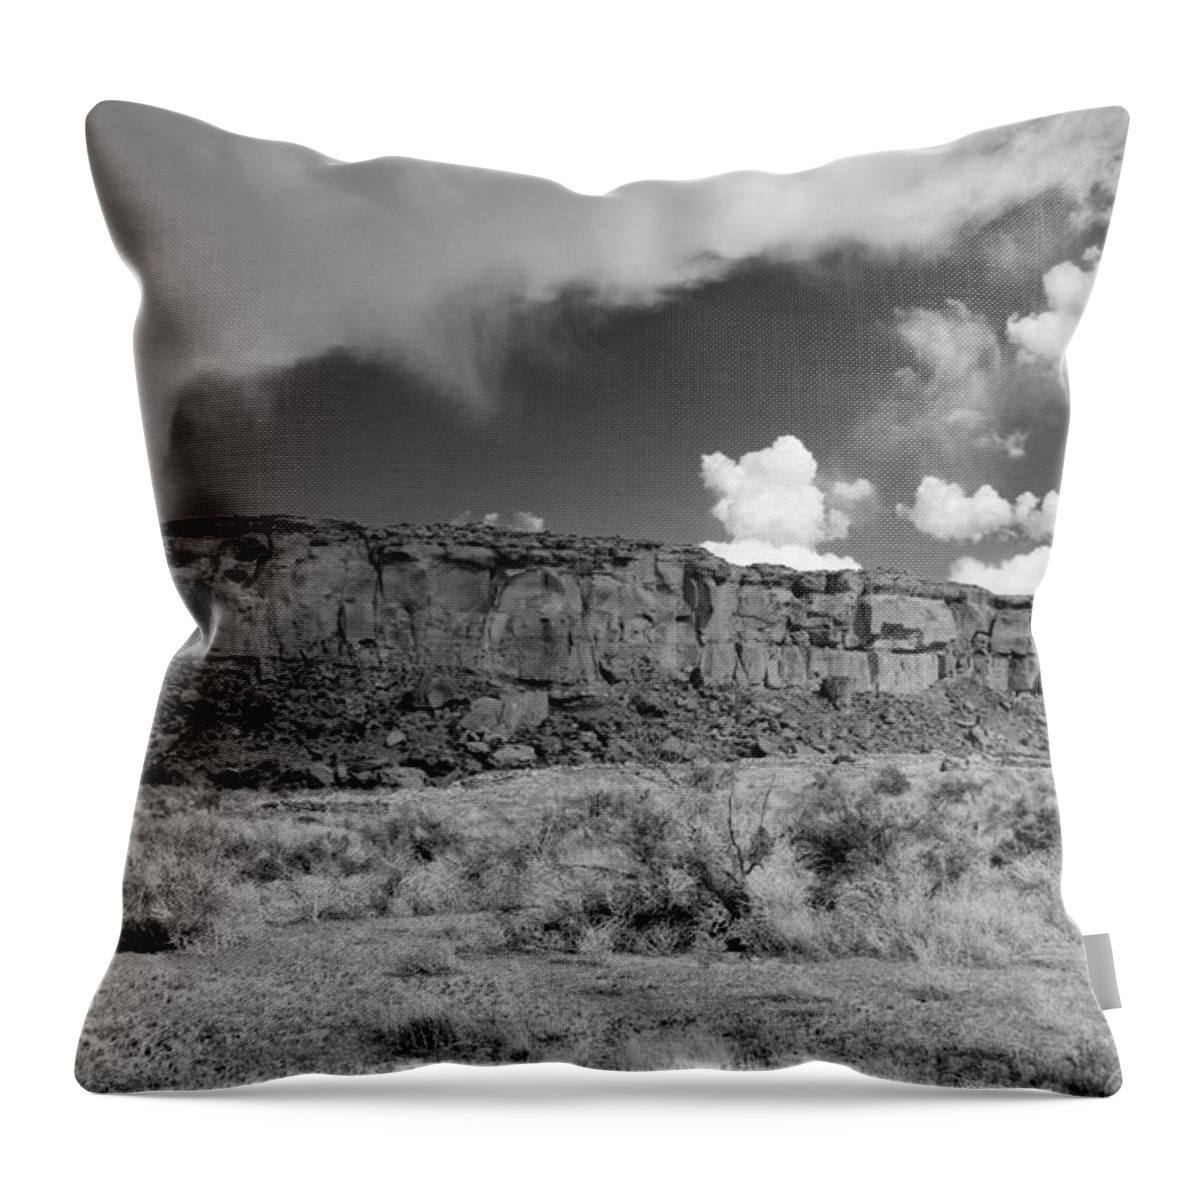 A Throw Pillow featuring the photograph A Chaco Sky bw by Elizabeth Sullivan